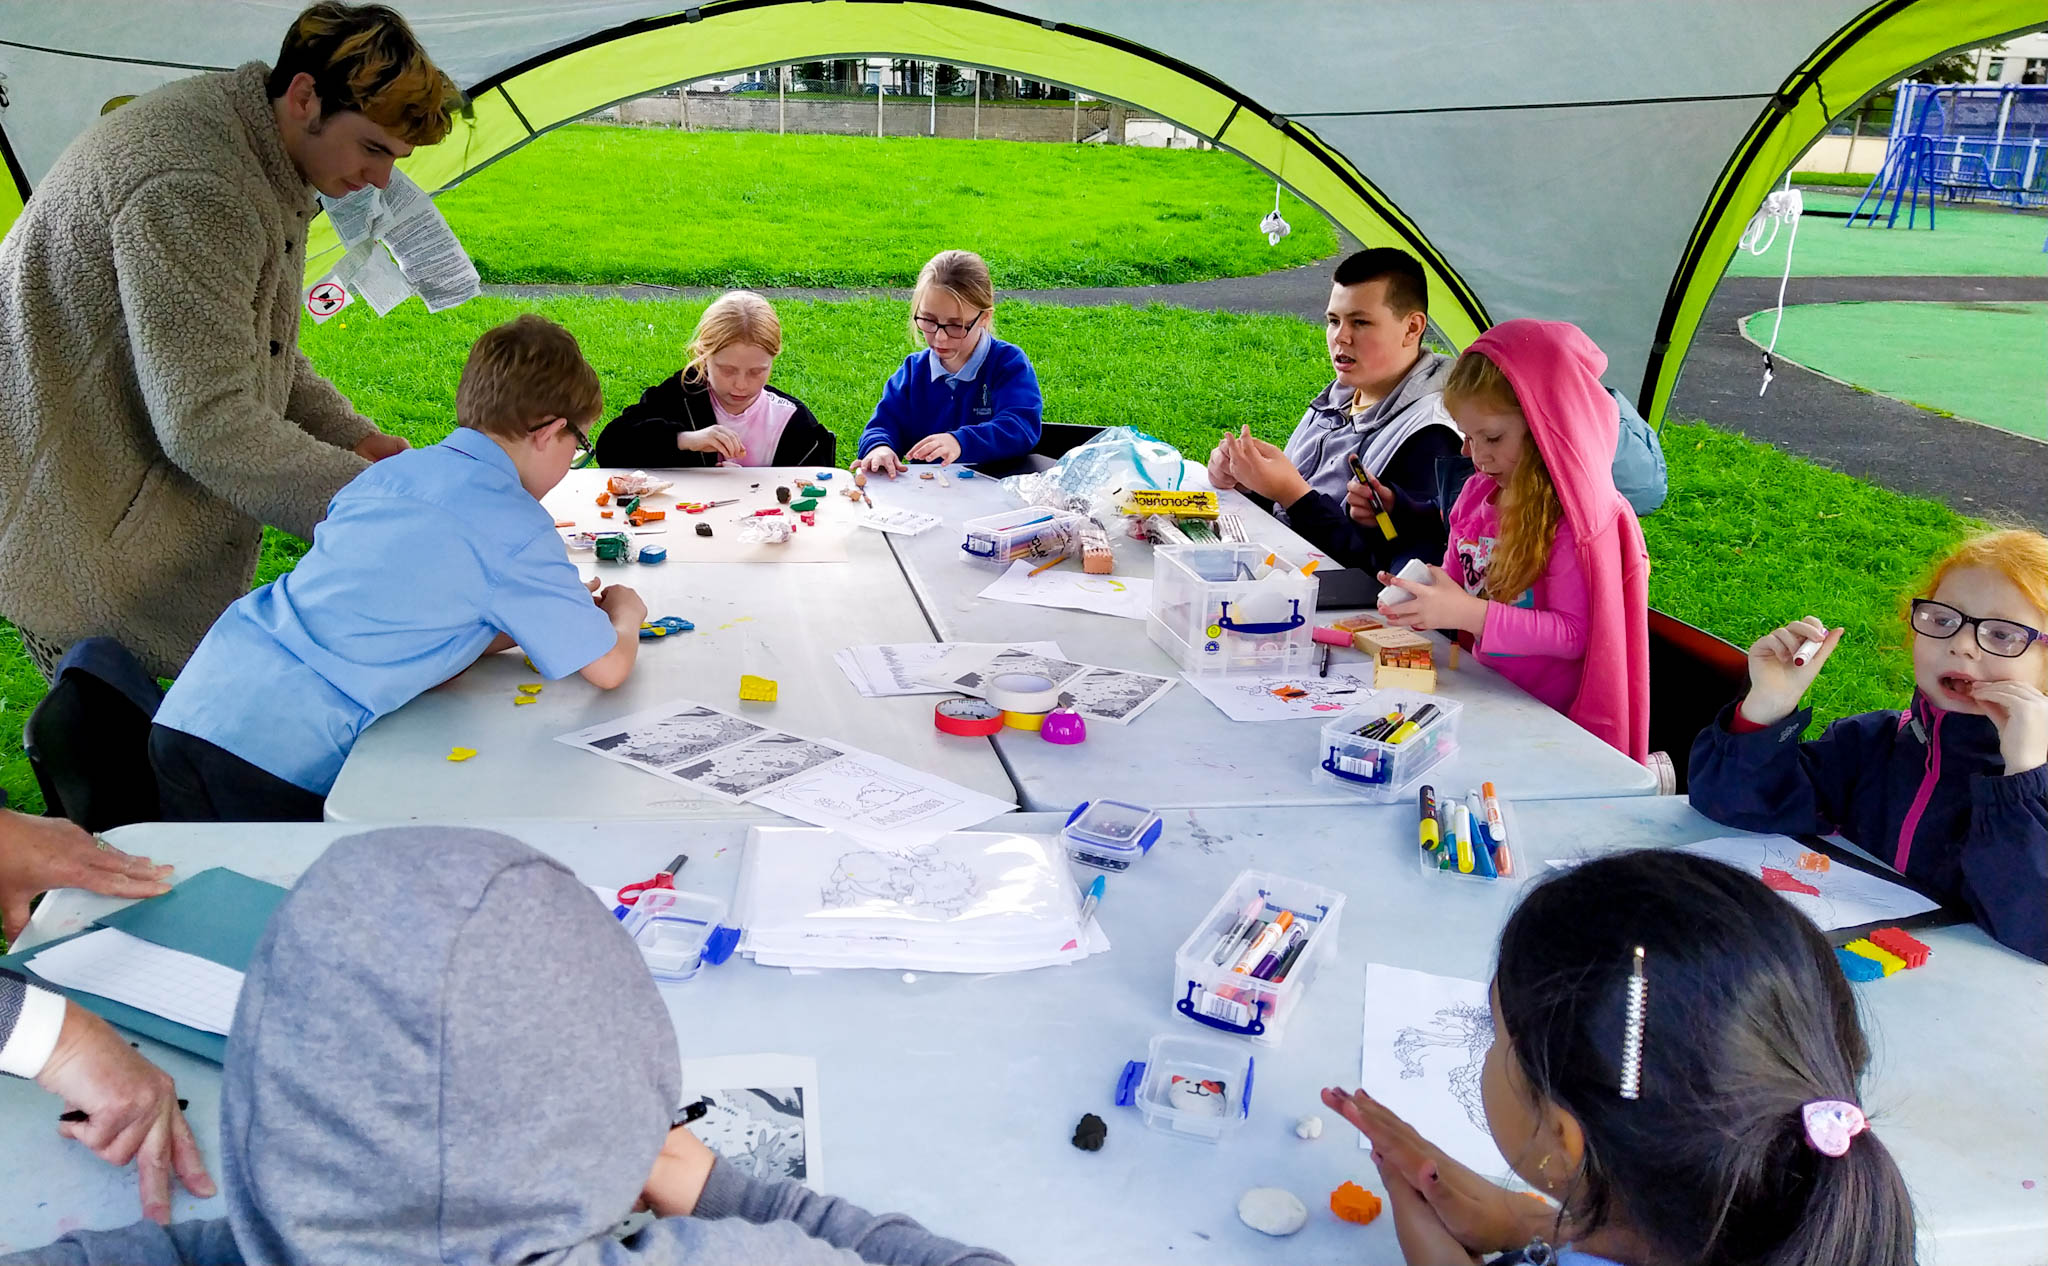 Glasgow youngsters get creative thanks to Wheatley